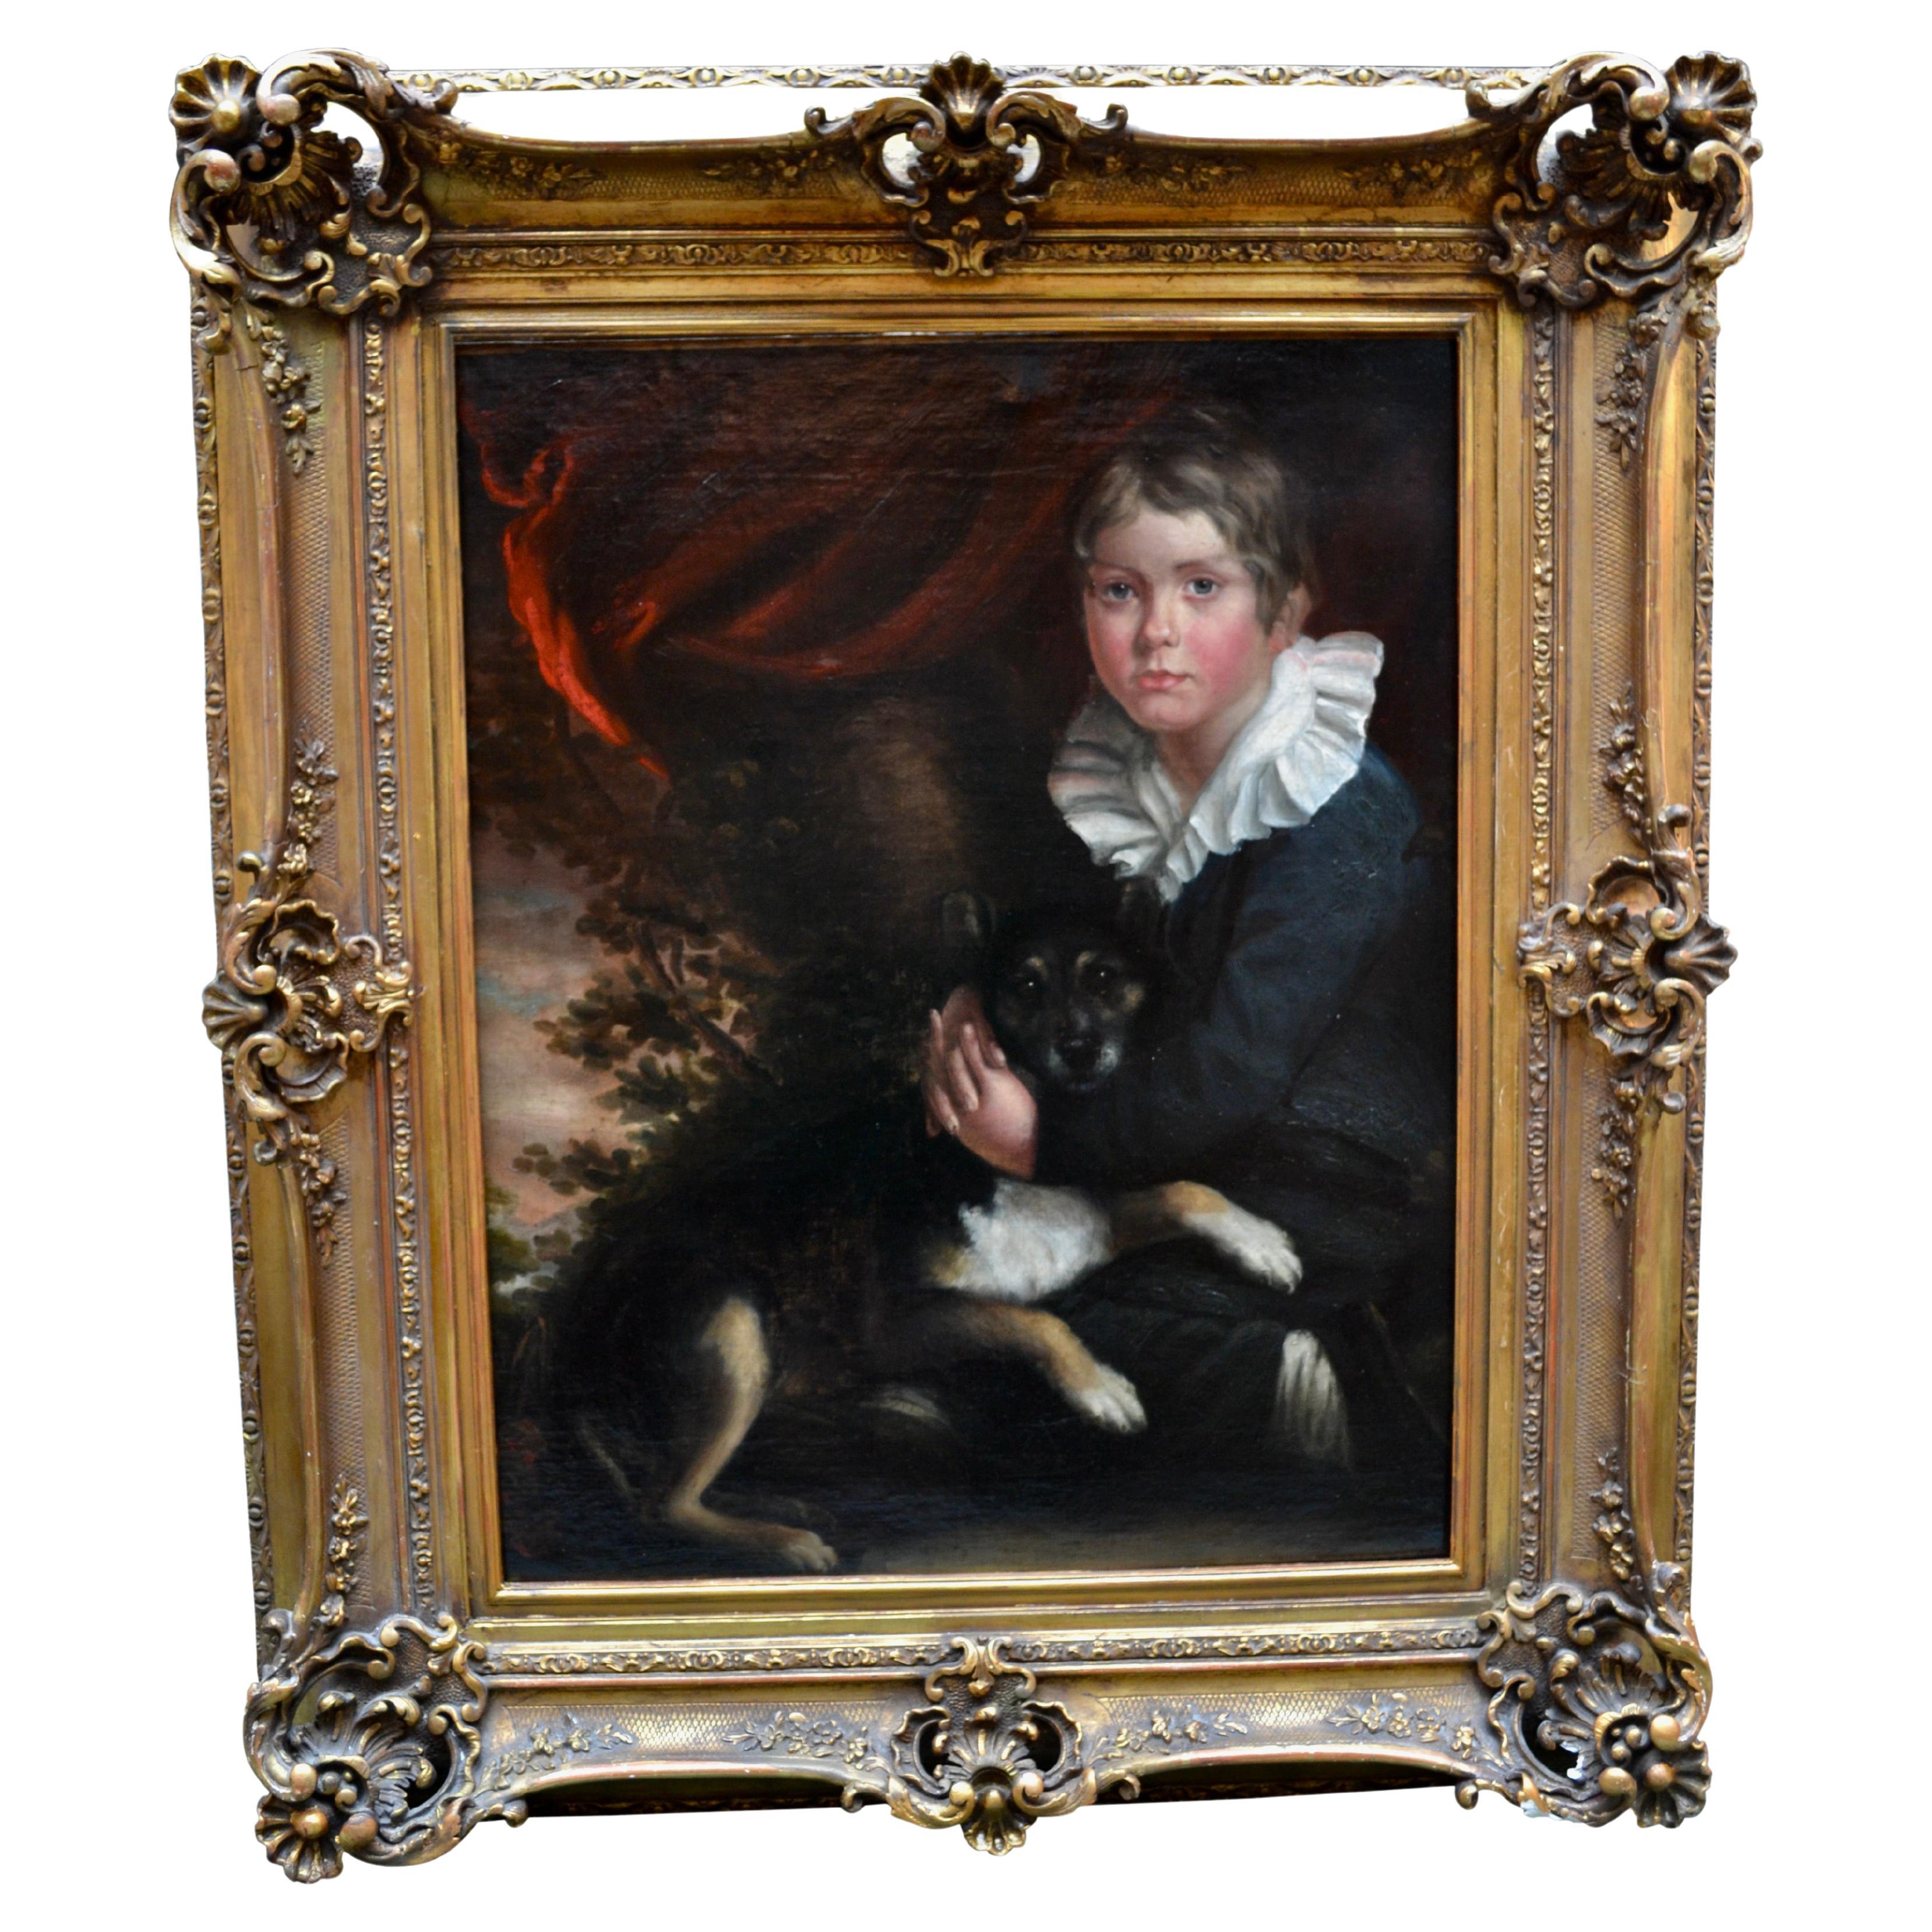 The oil painting on canvas is of a young boy 'hugging' his dog, which lies on the boy's lap. It is very much in the style of the Scottish painter Henry Raeburn. The boy is dressed in an early 19th century style dark suit having a white frilly